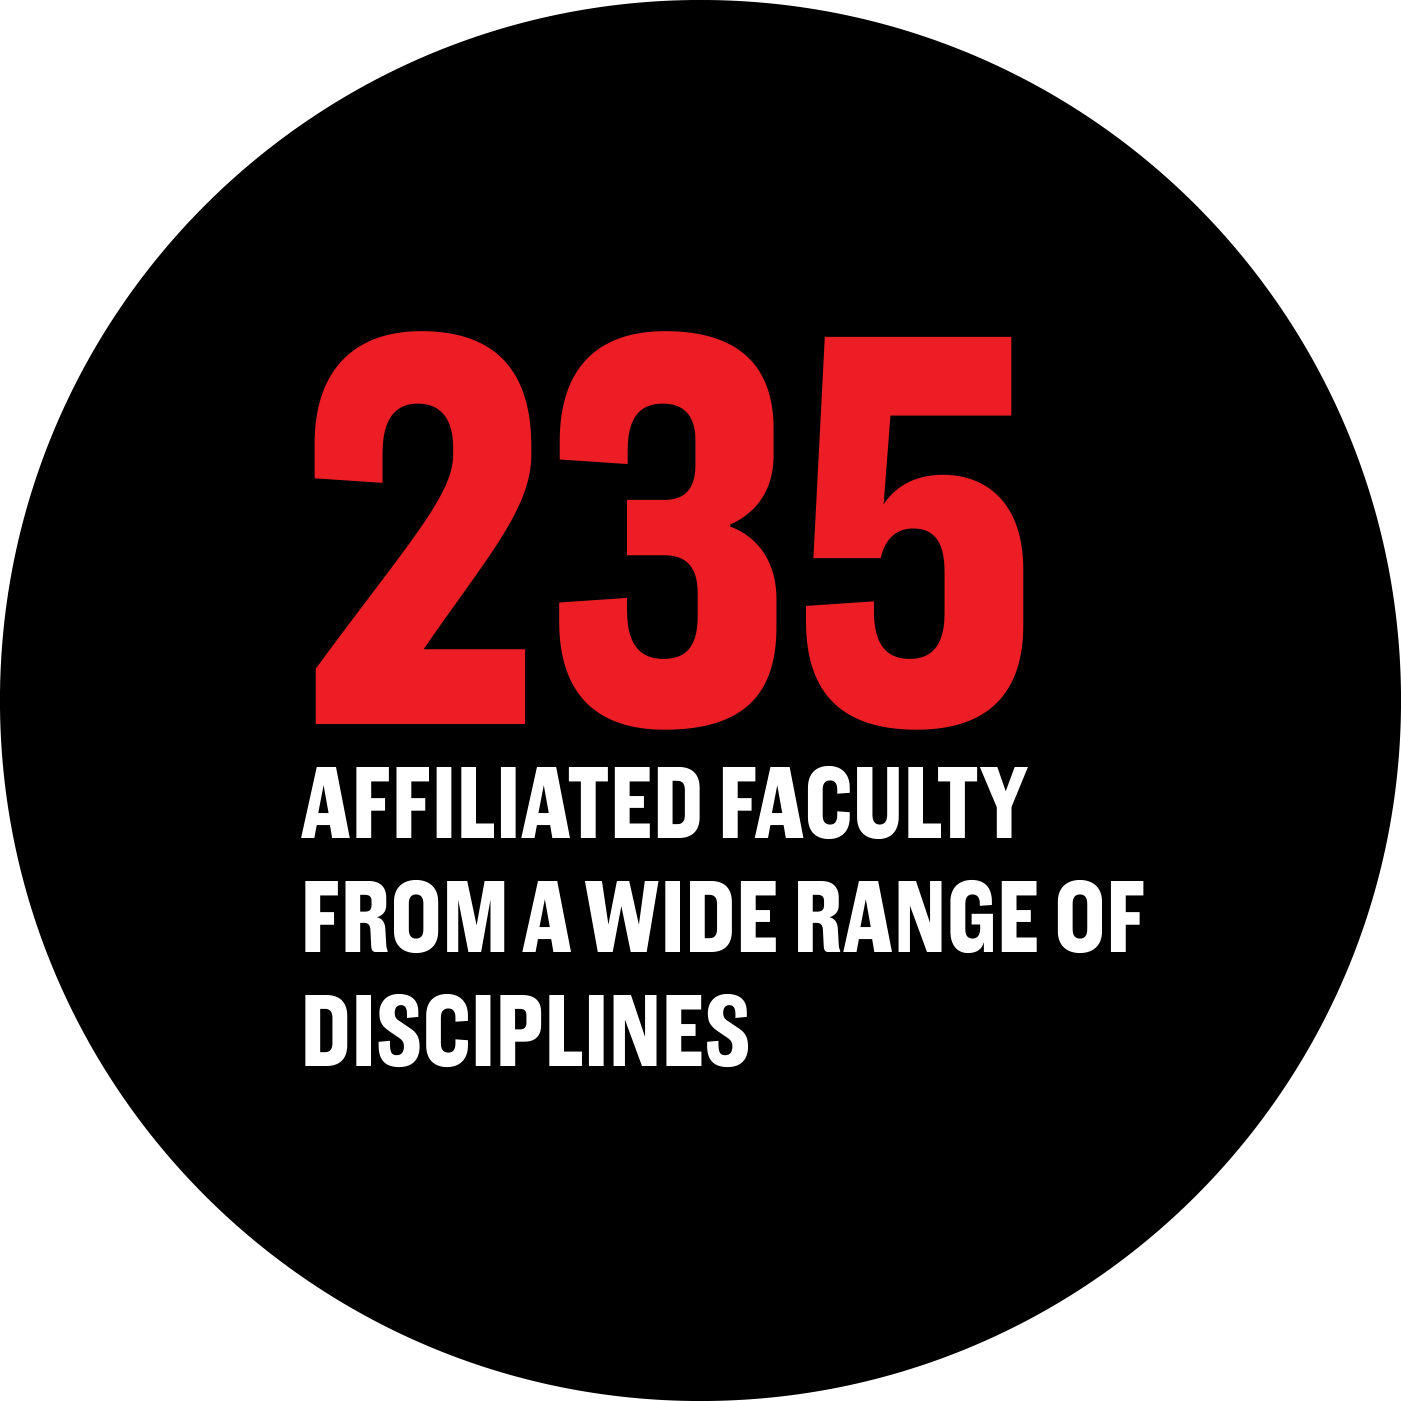 235 affiliated faculty from a wide range of disciplines